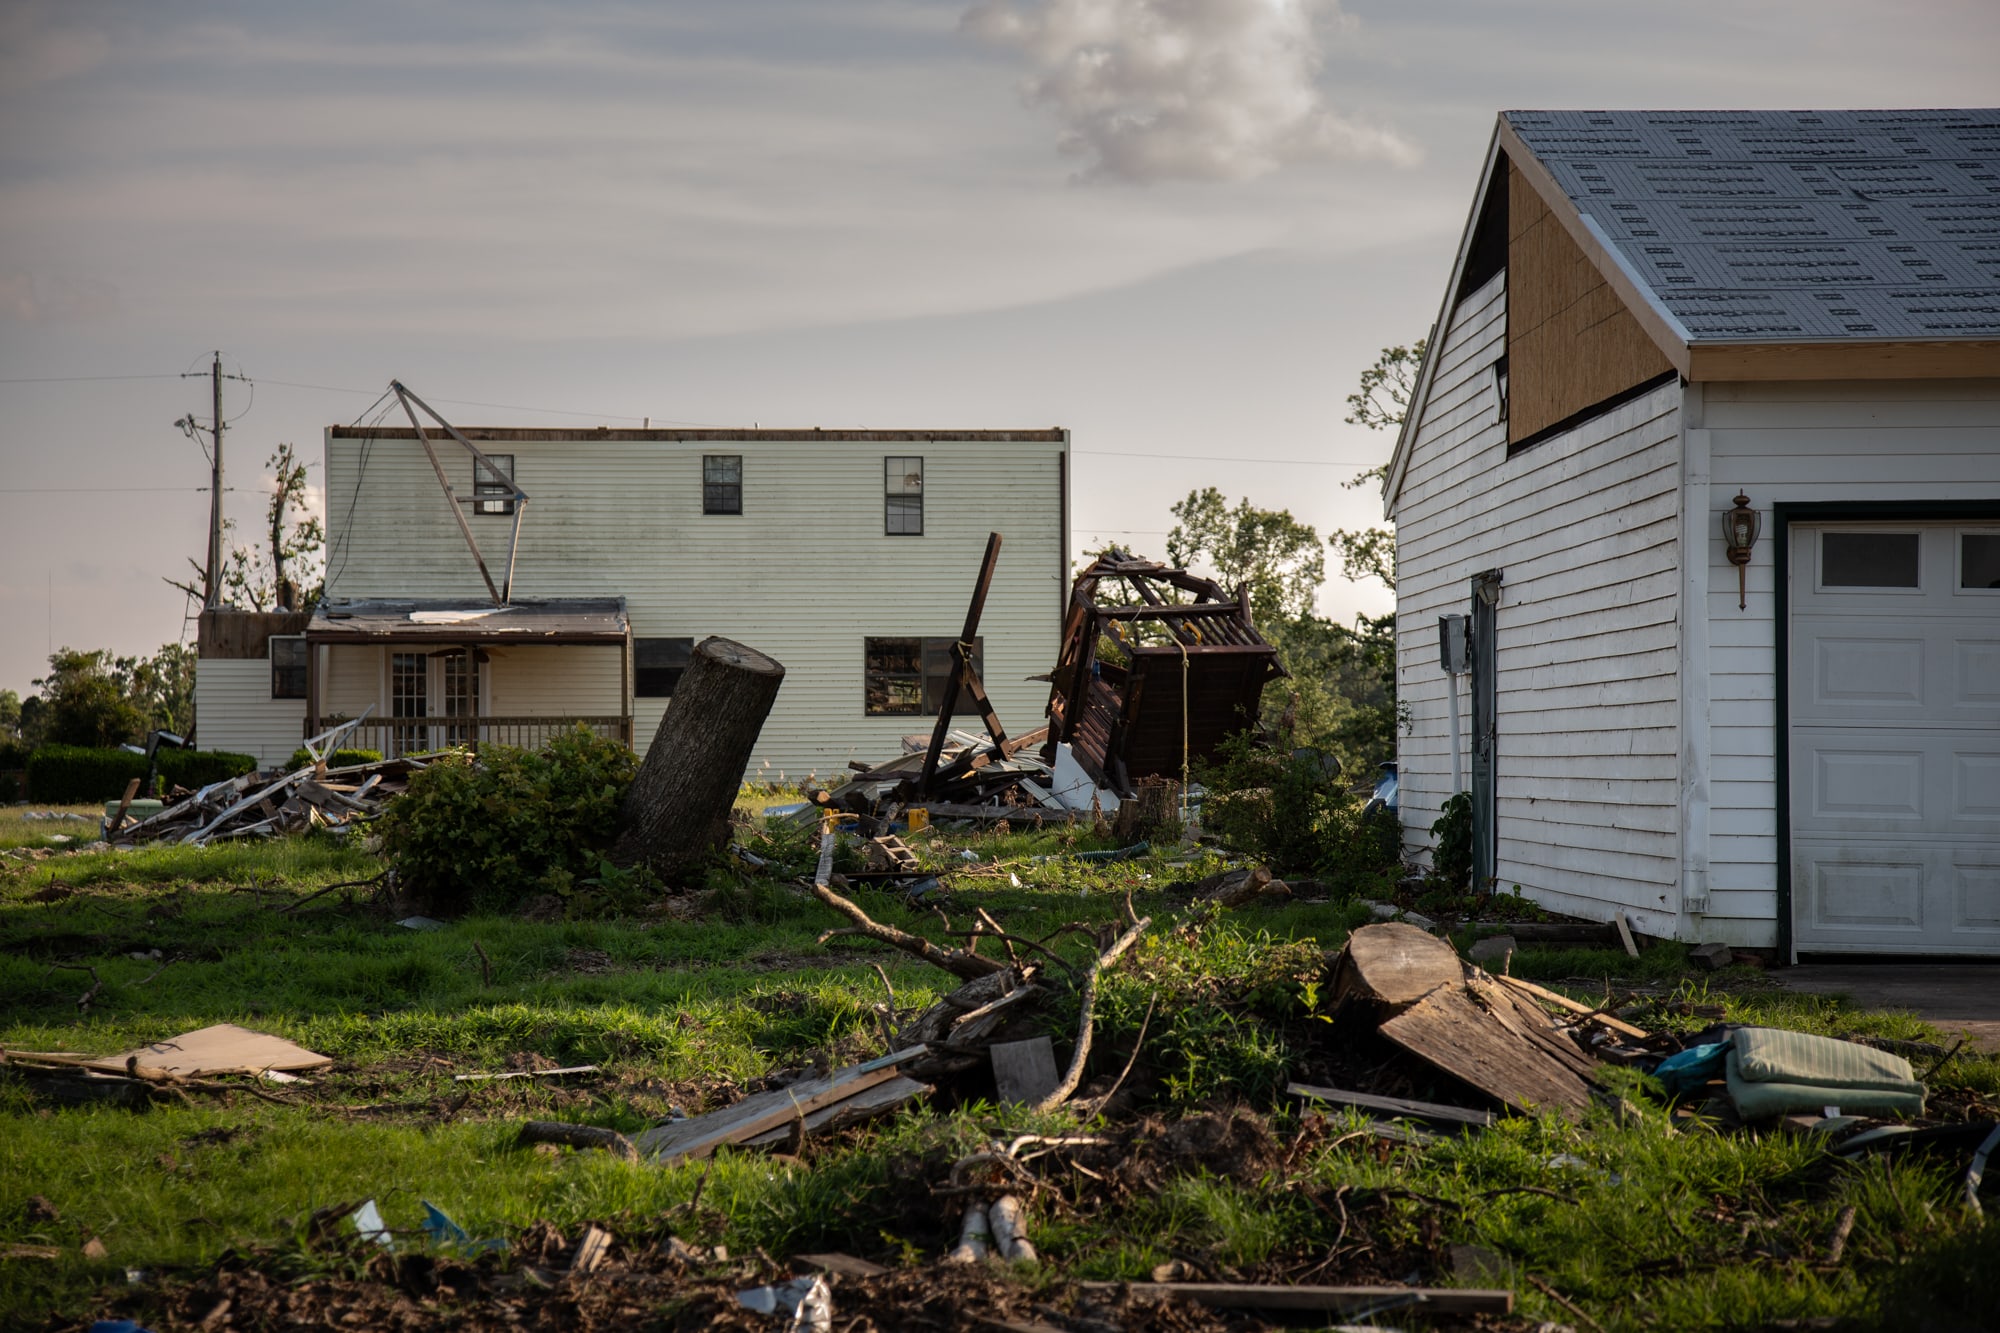 Exactly eight years after an EF5 tornado tore through Joplin, Missouri – killing 161 people and destroying a third of the city's homes – a twister hit Carl Junction, just north of Joplin, on May 22, 2019. (Brigette Waltermire/News21)